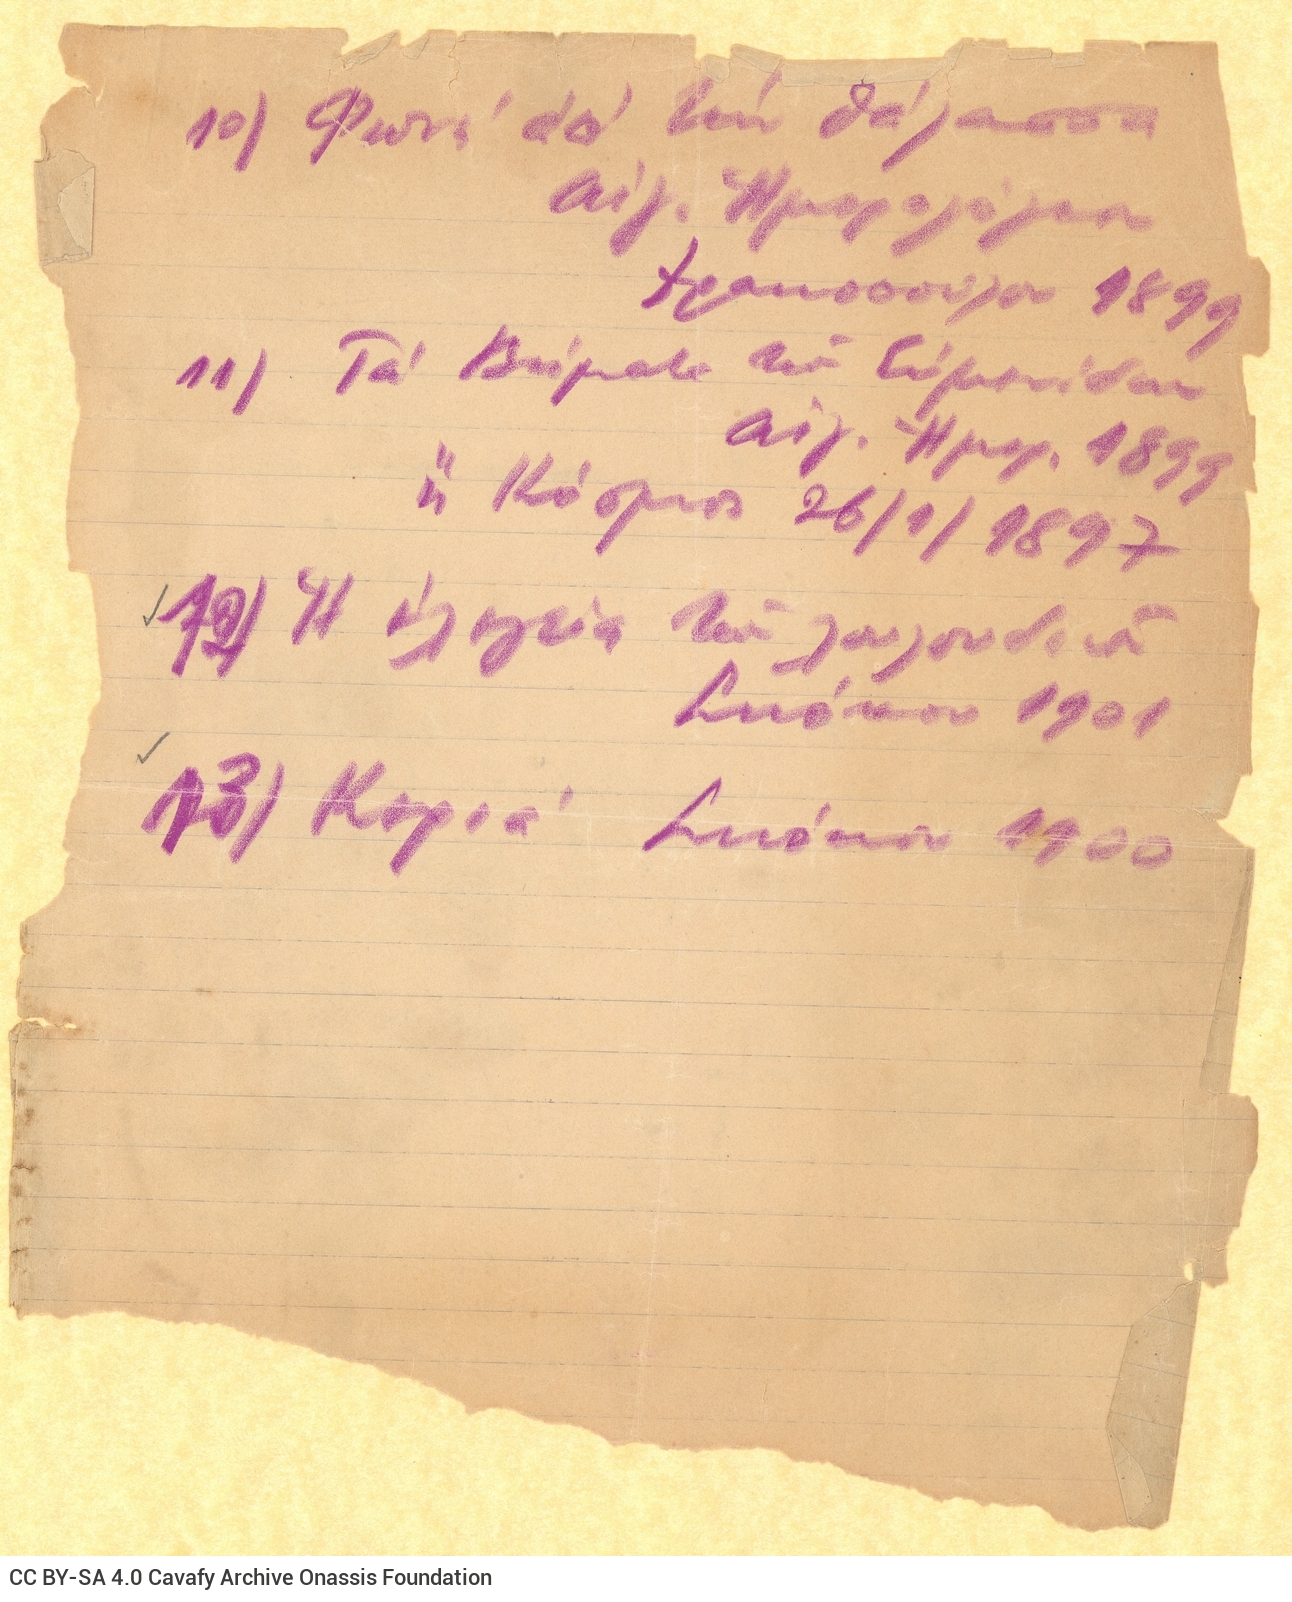 Handwritten list of thirteen poems by Cavafy, with reference to the printed media in which they were published. They are t